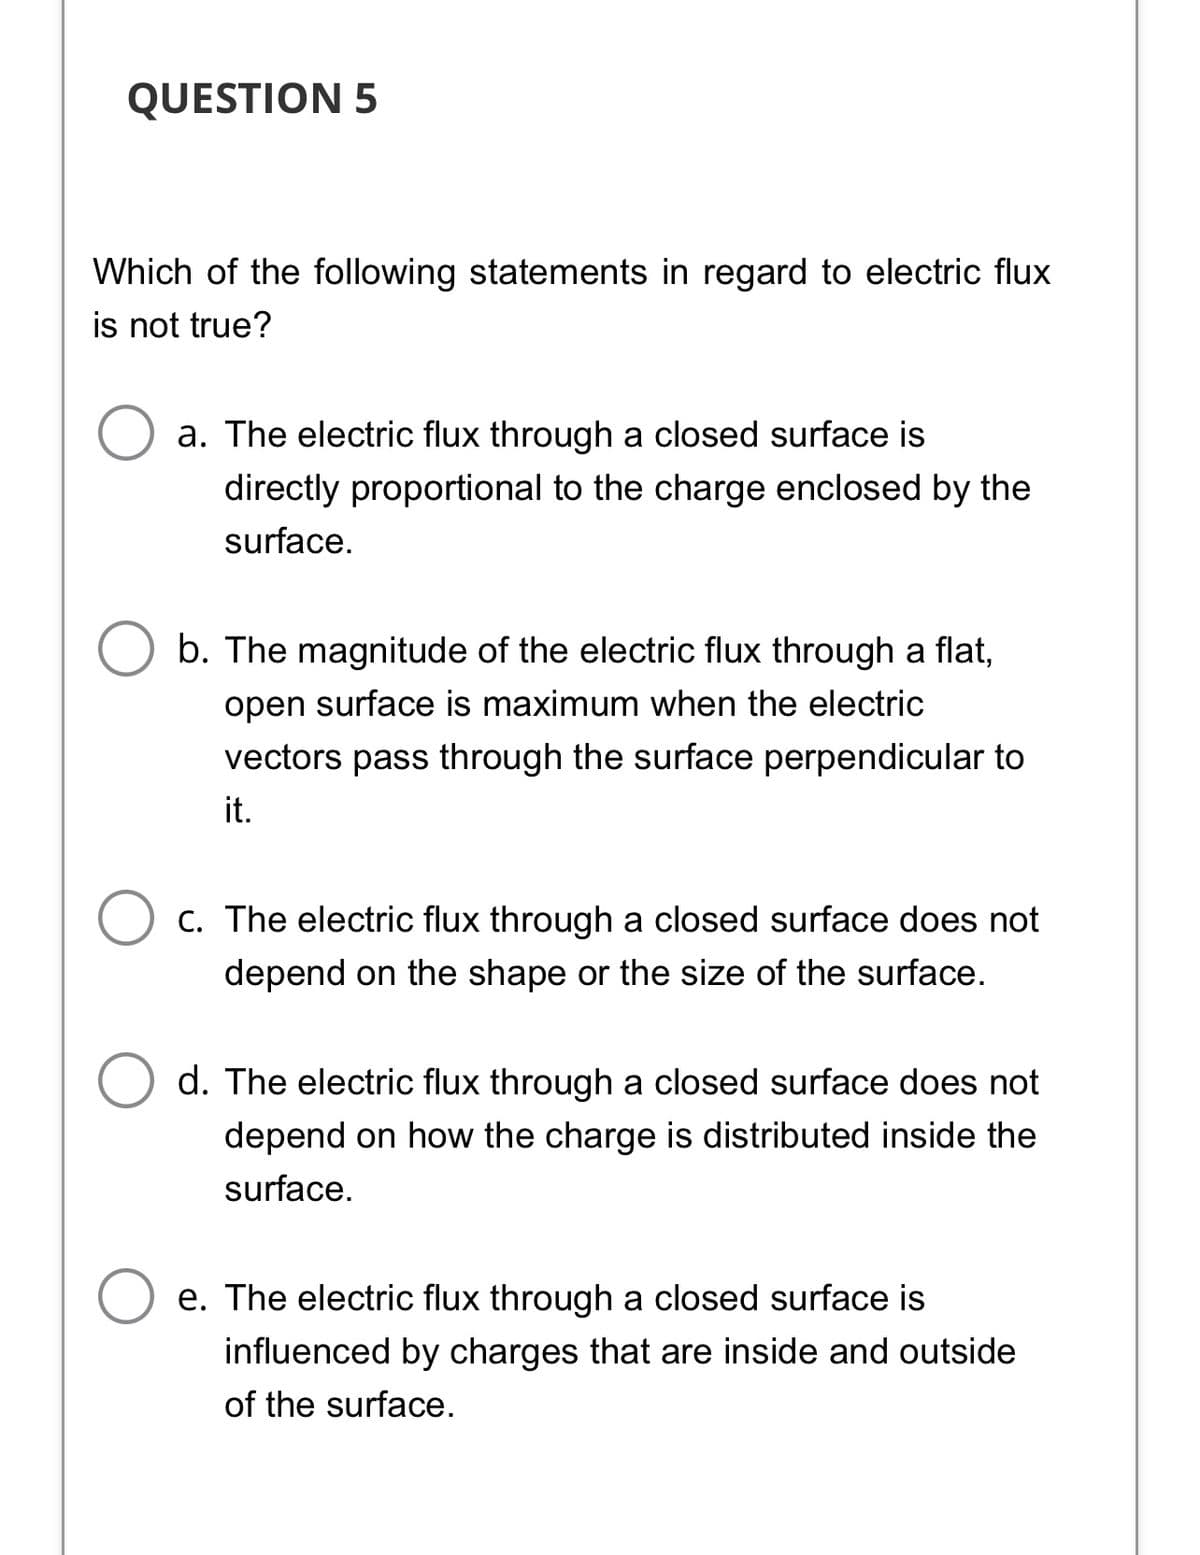 QUESTION 5
Which of the following statements in regard to electric flux
is not true?
a. The electric flux through a closed surface is
directly proportional to the charge enclosed by the
surface.
b. The magnitude of the electric flux through a flat,
open surface is maximum when the electric
vectors pass through the surface perpendicular to
it.
O c. The electric flux through a closed surface does not
depend on the shape or the size of the surface.
d. The electric flux through a closed surface does not
depend on how the charge is distributed inside the
surface.
e. The electric flux through a closed surface is
influenced by charges that are inside and outside
of the surface.
